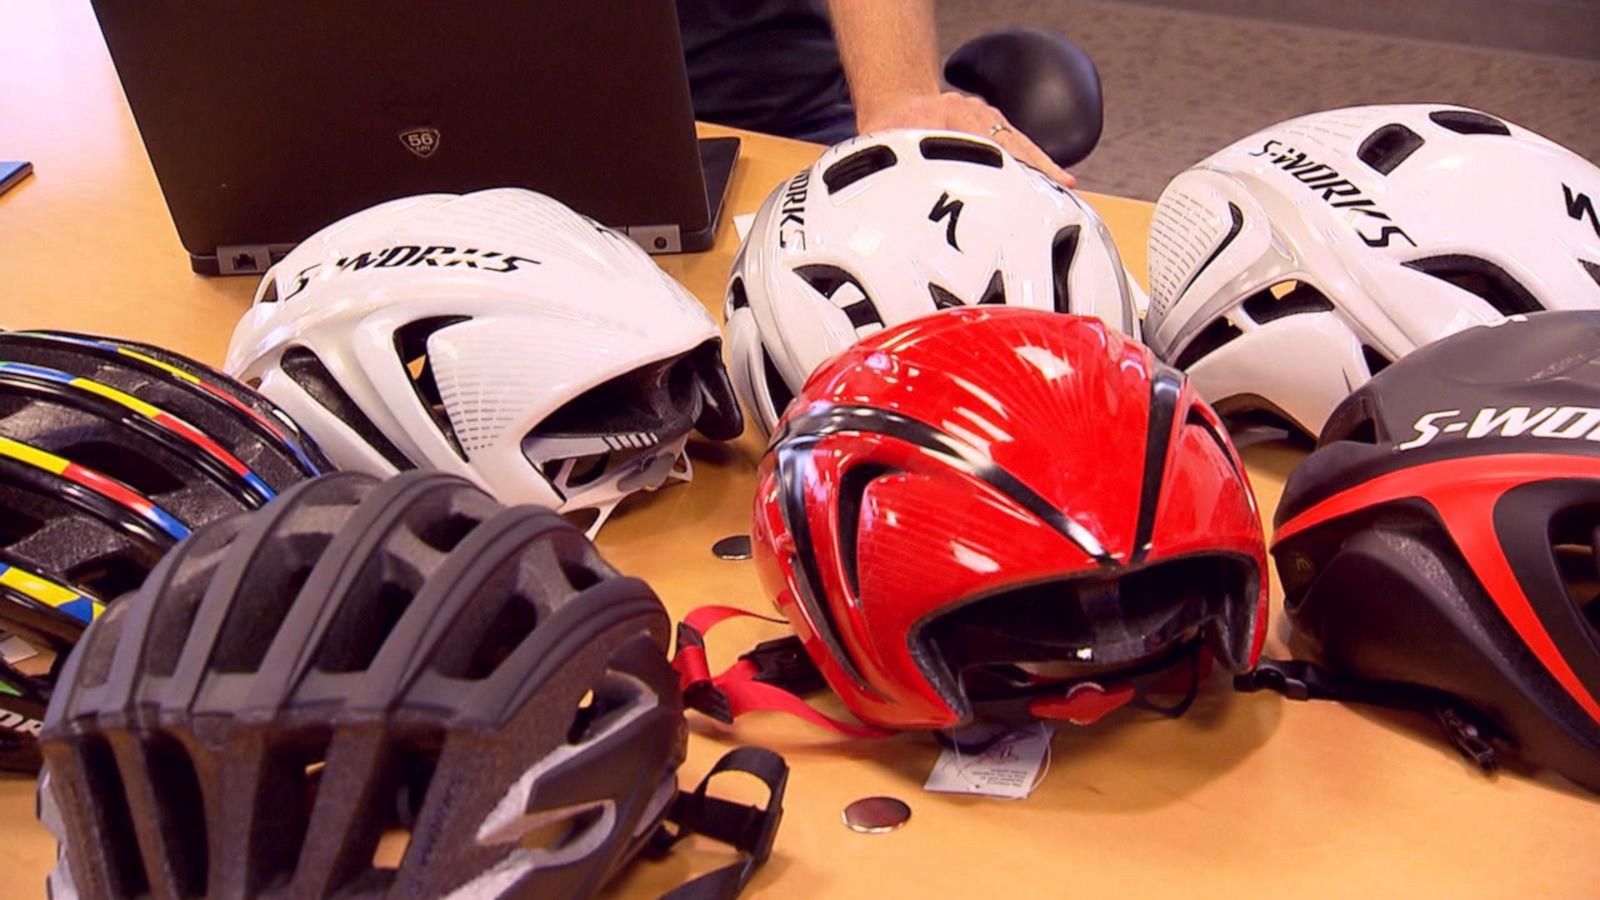 What to know about counterfeit bike helmets on sale online